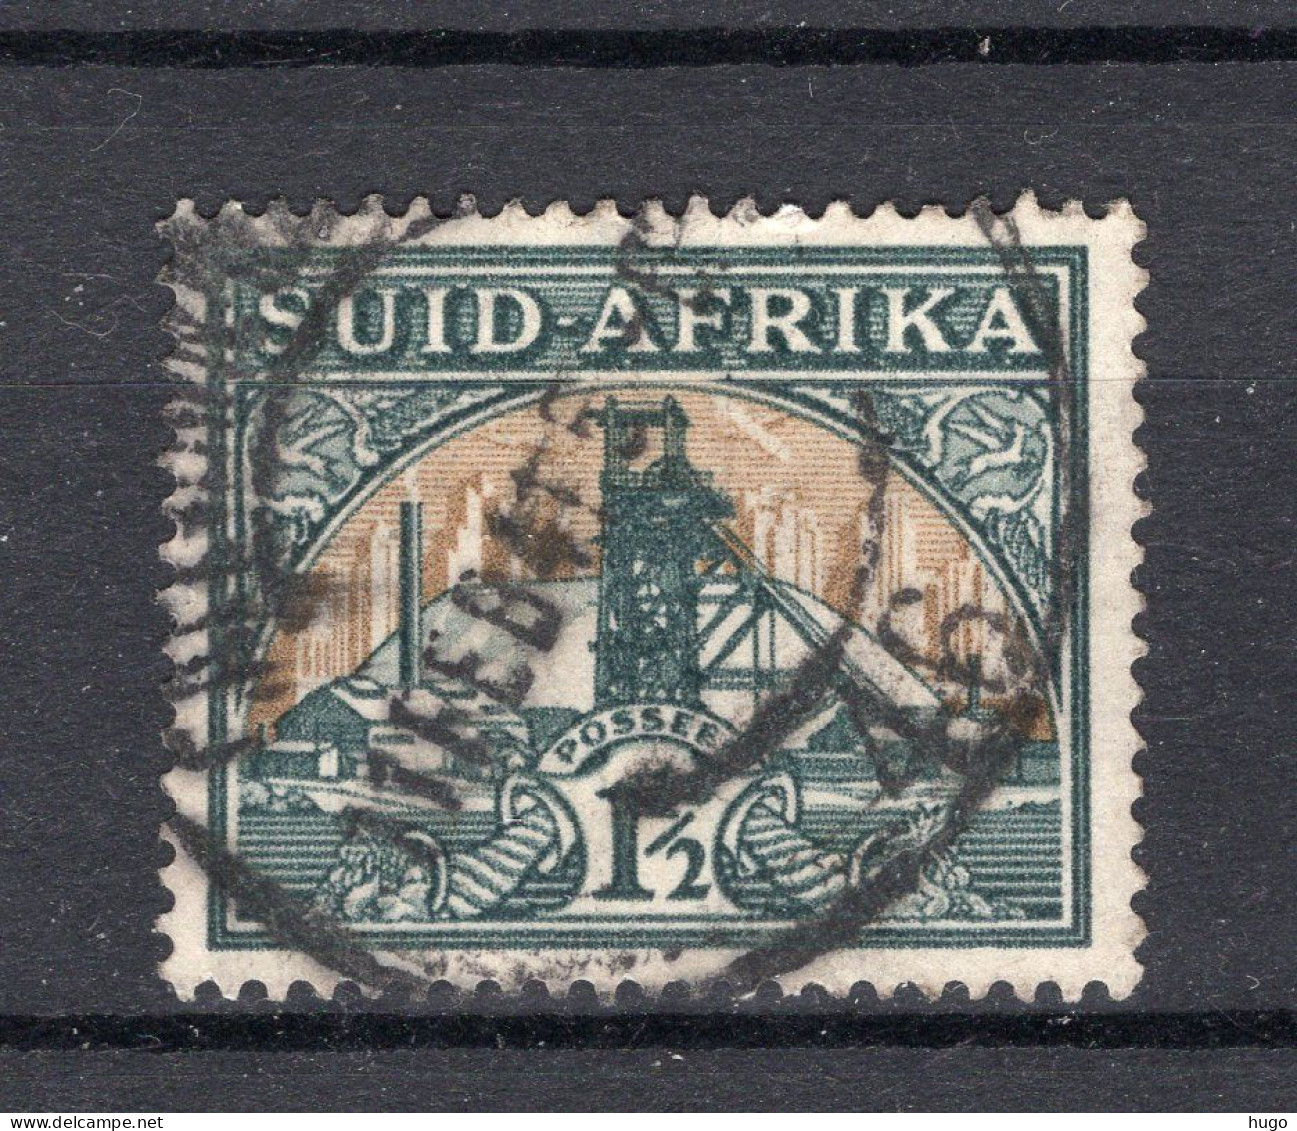 ZUID AFRIKA Yt. 77° Gestempeld 1936 - Used Stamps